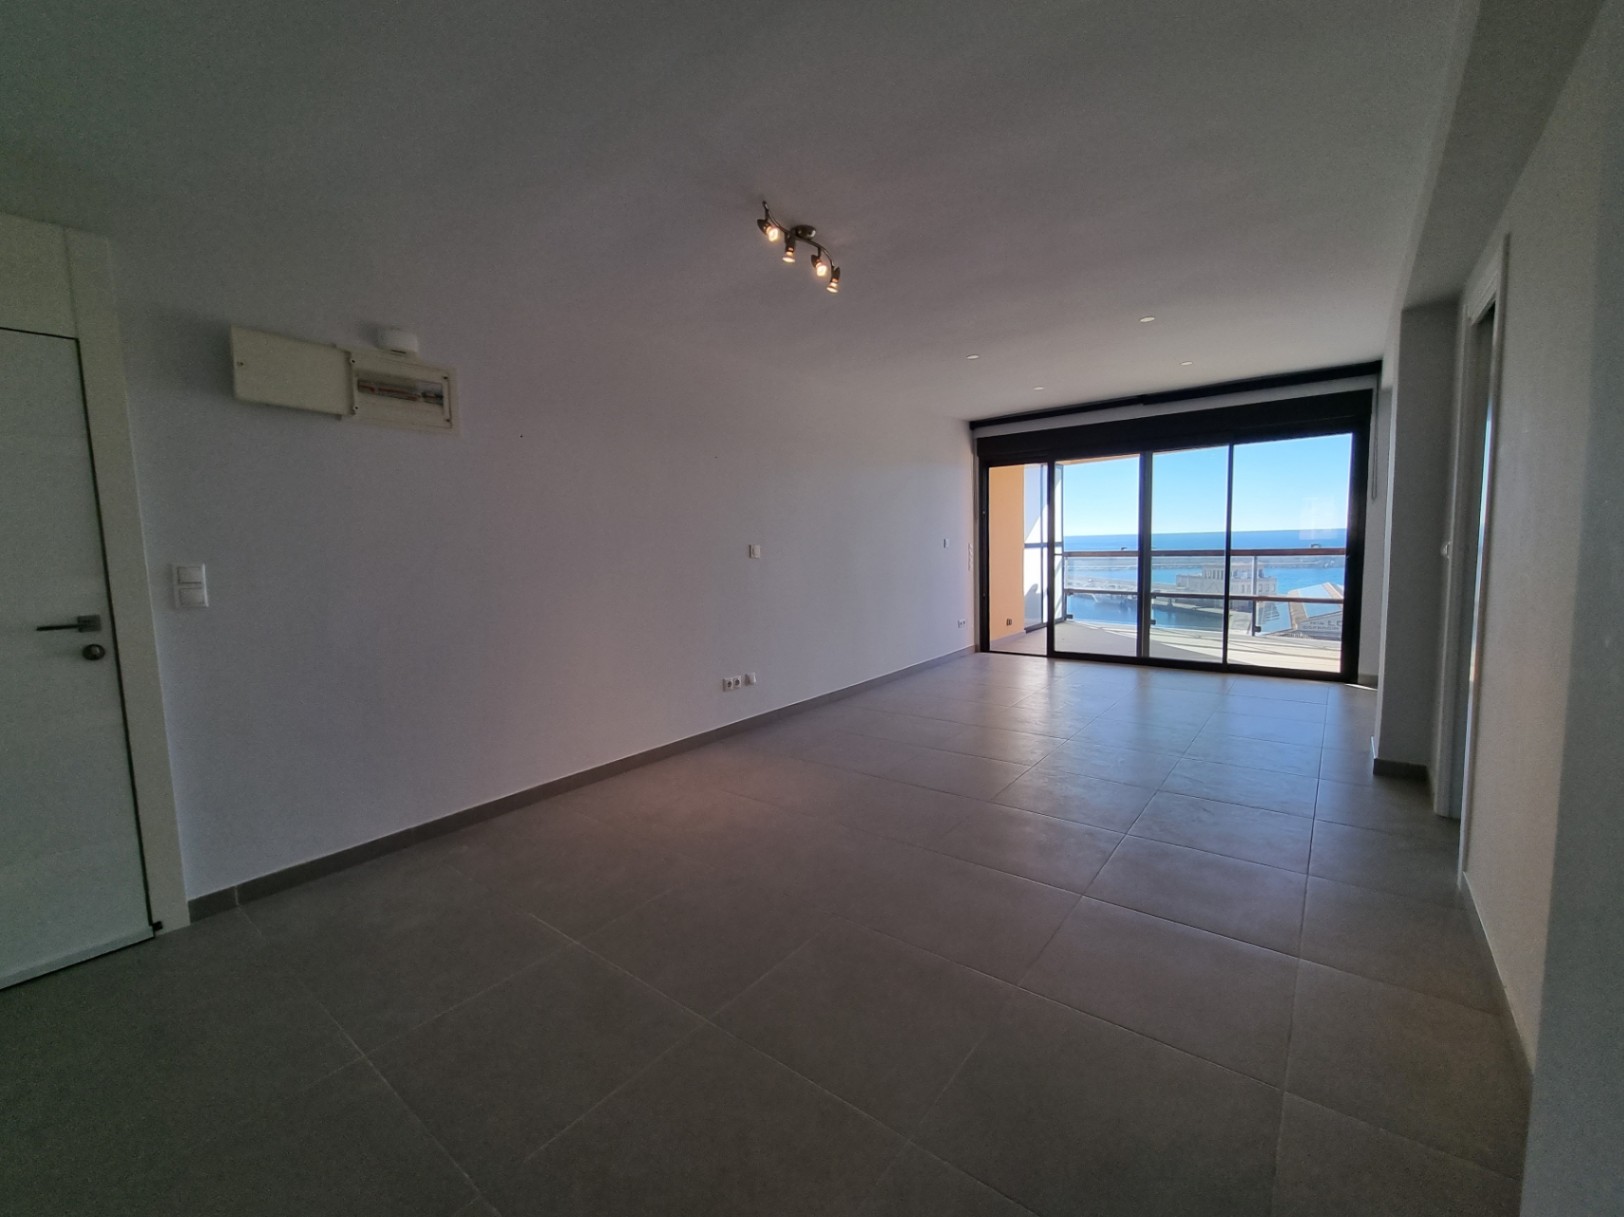 Splendid Frontline Apartment: Exceptional Views of the Port of Calpe